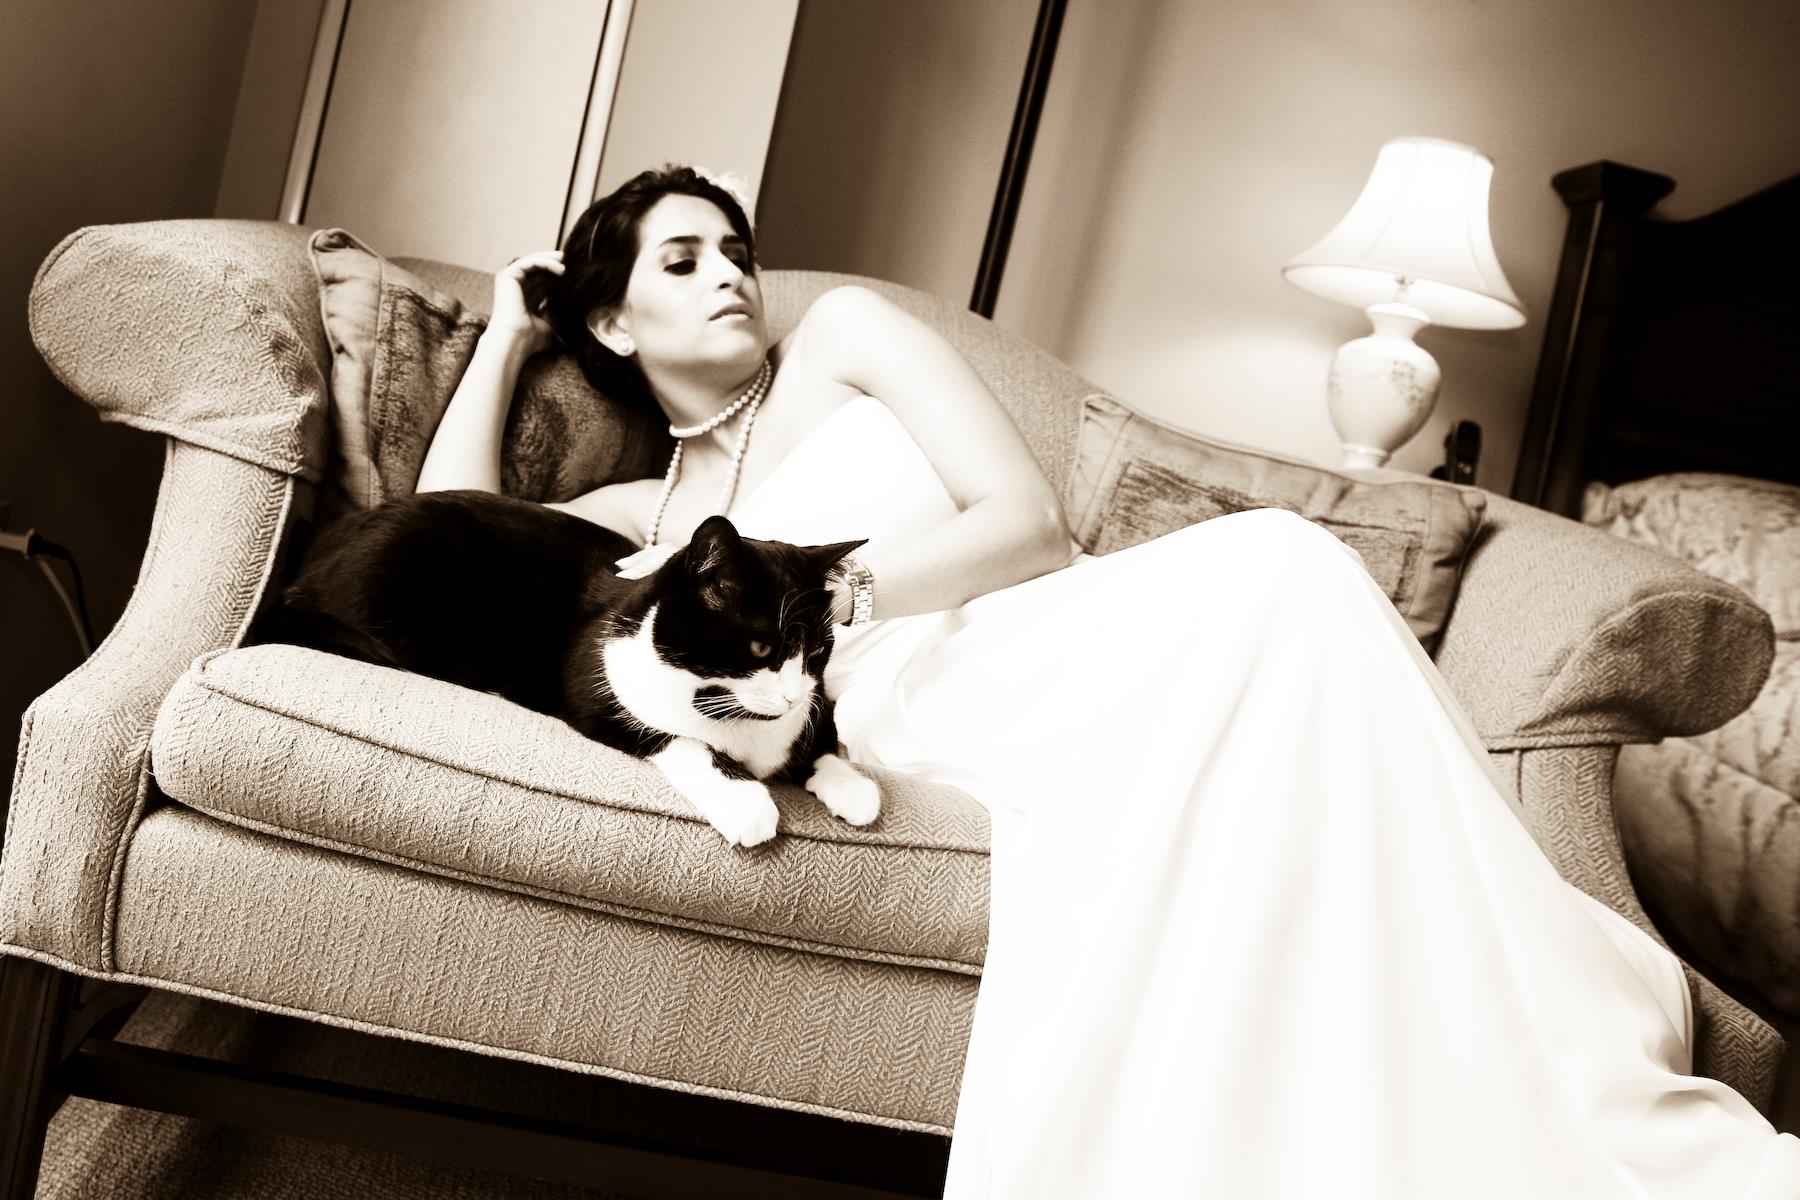 Bride and her kitty cat on couch